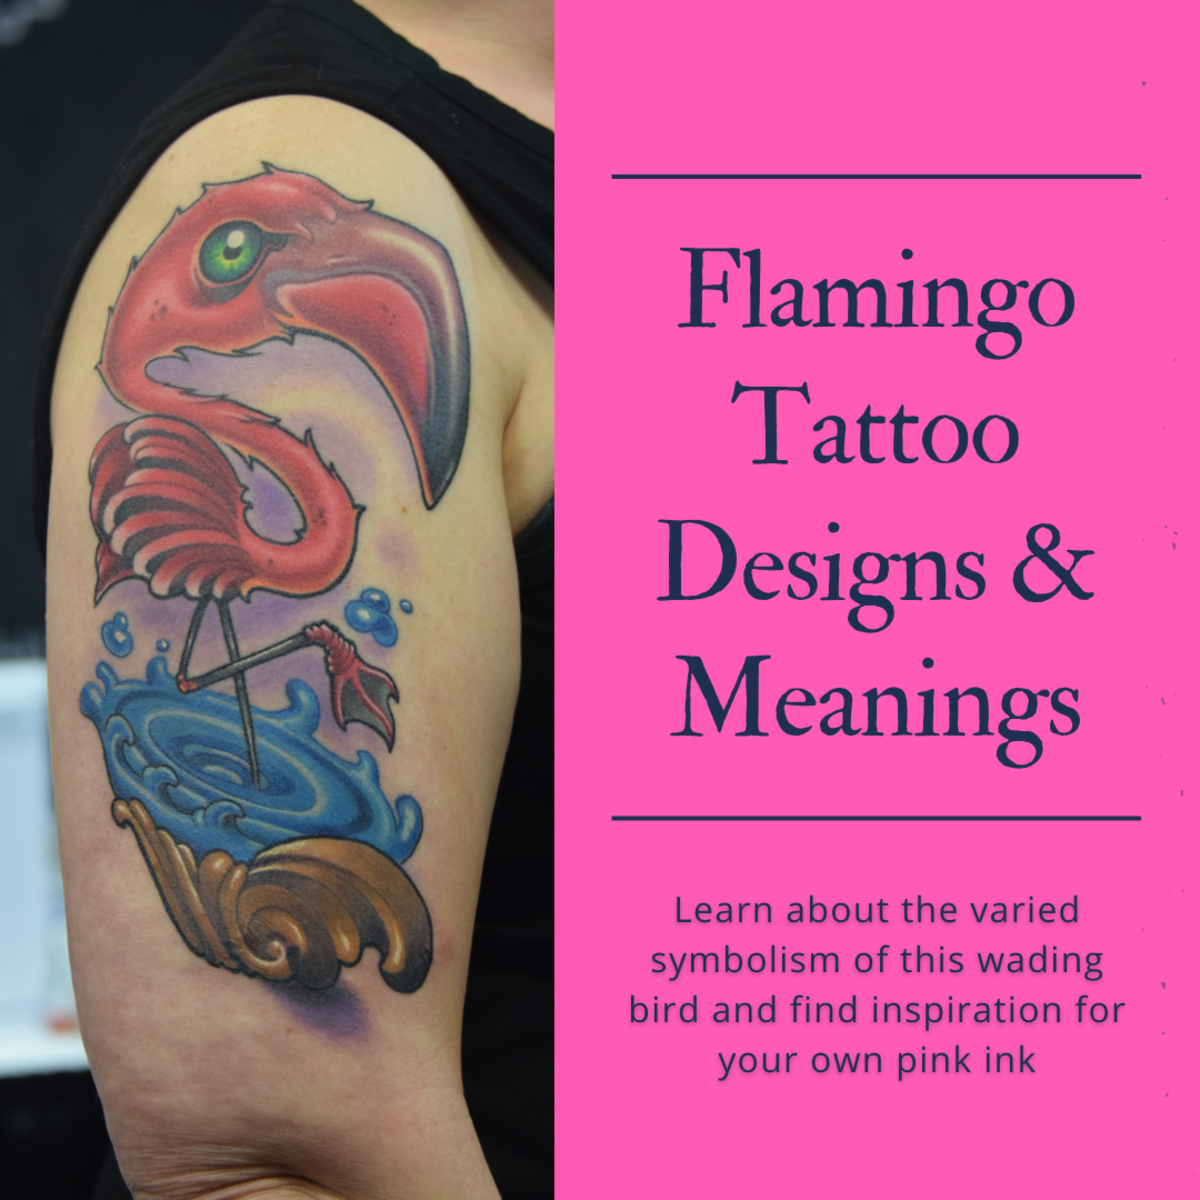 This article will take a closer look at flamingo tattoos, providing information on their symbolism as well as examples for those looking for inspiration.